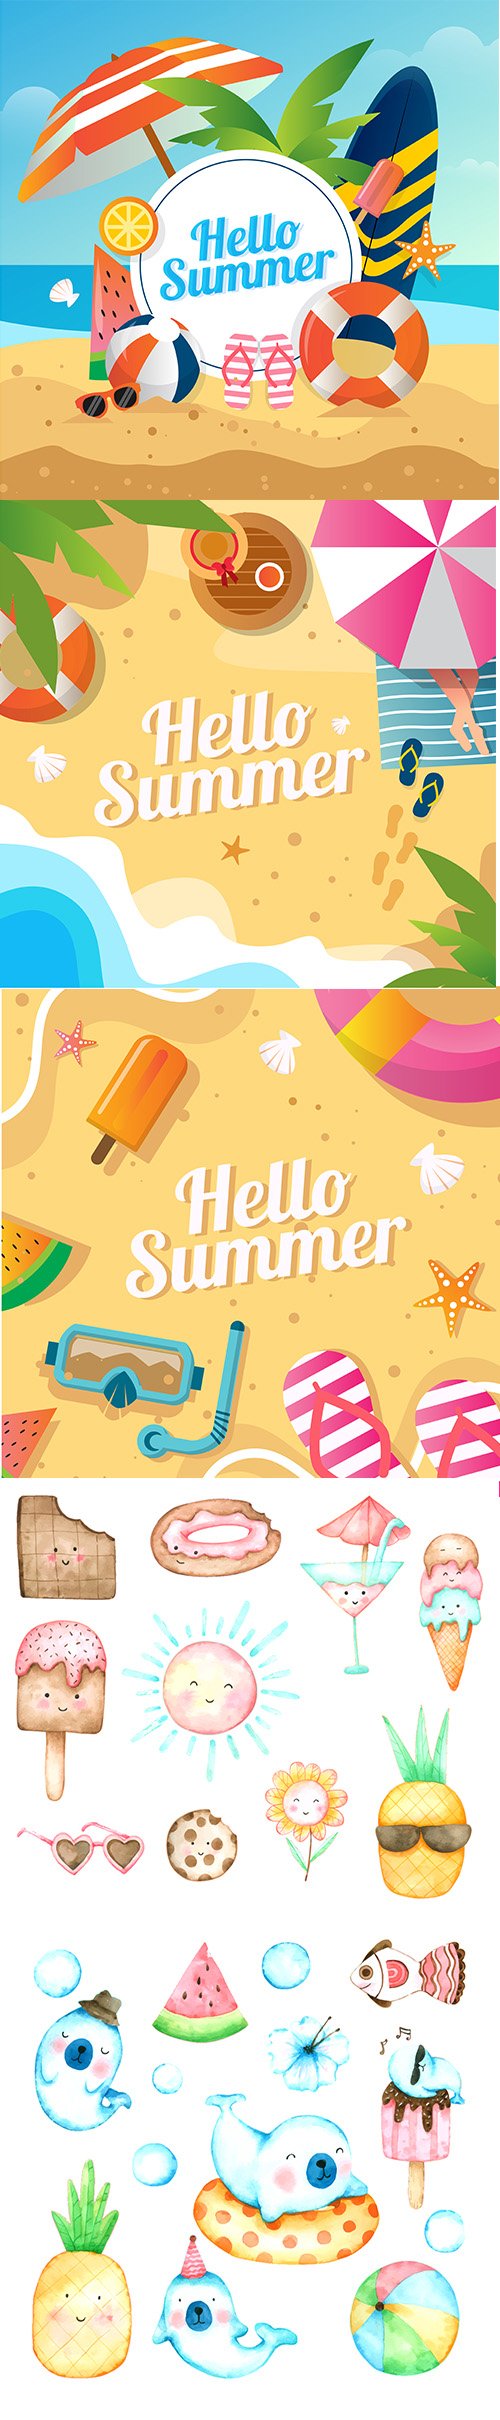 Summer Backgrounds Concept and Cartoons Ice and animals